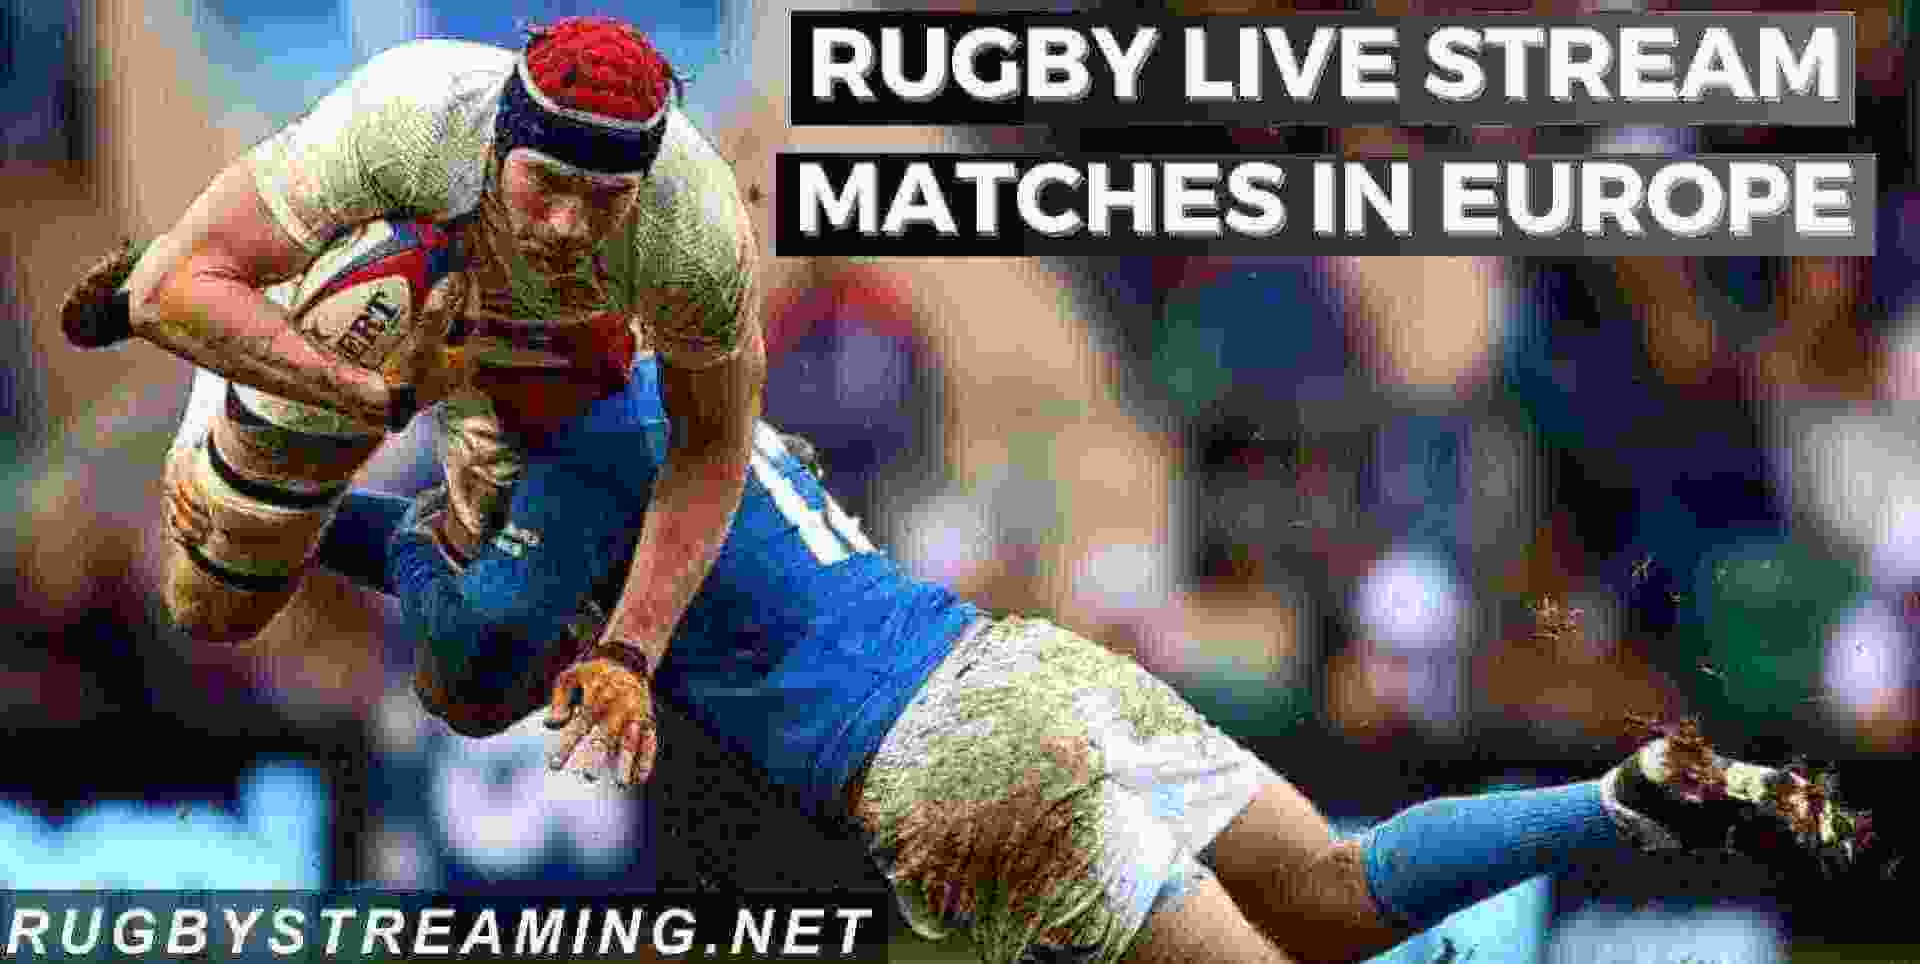 Watch Rugby Live Stream in Europe